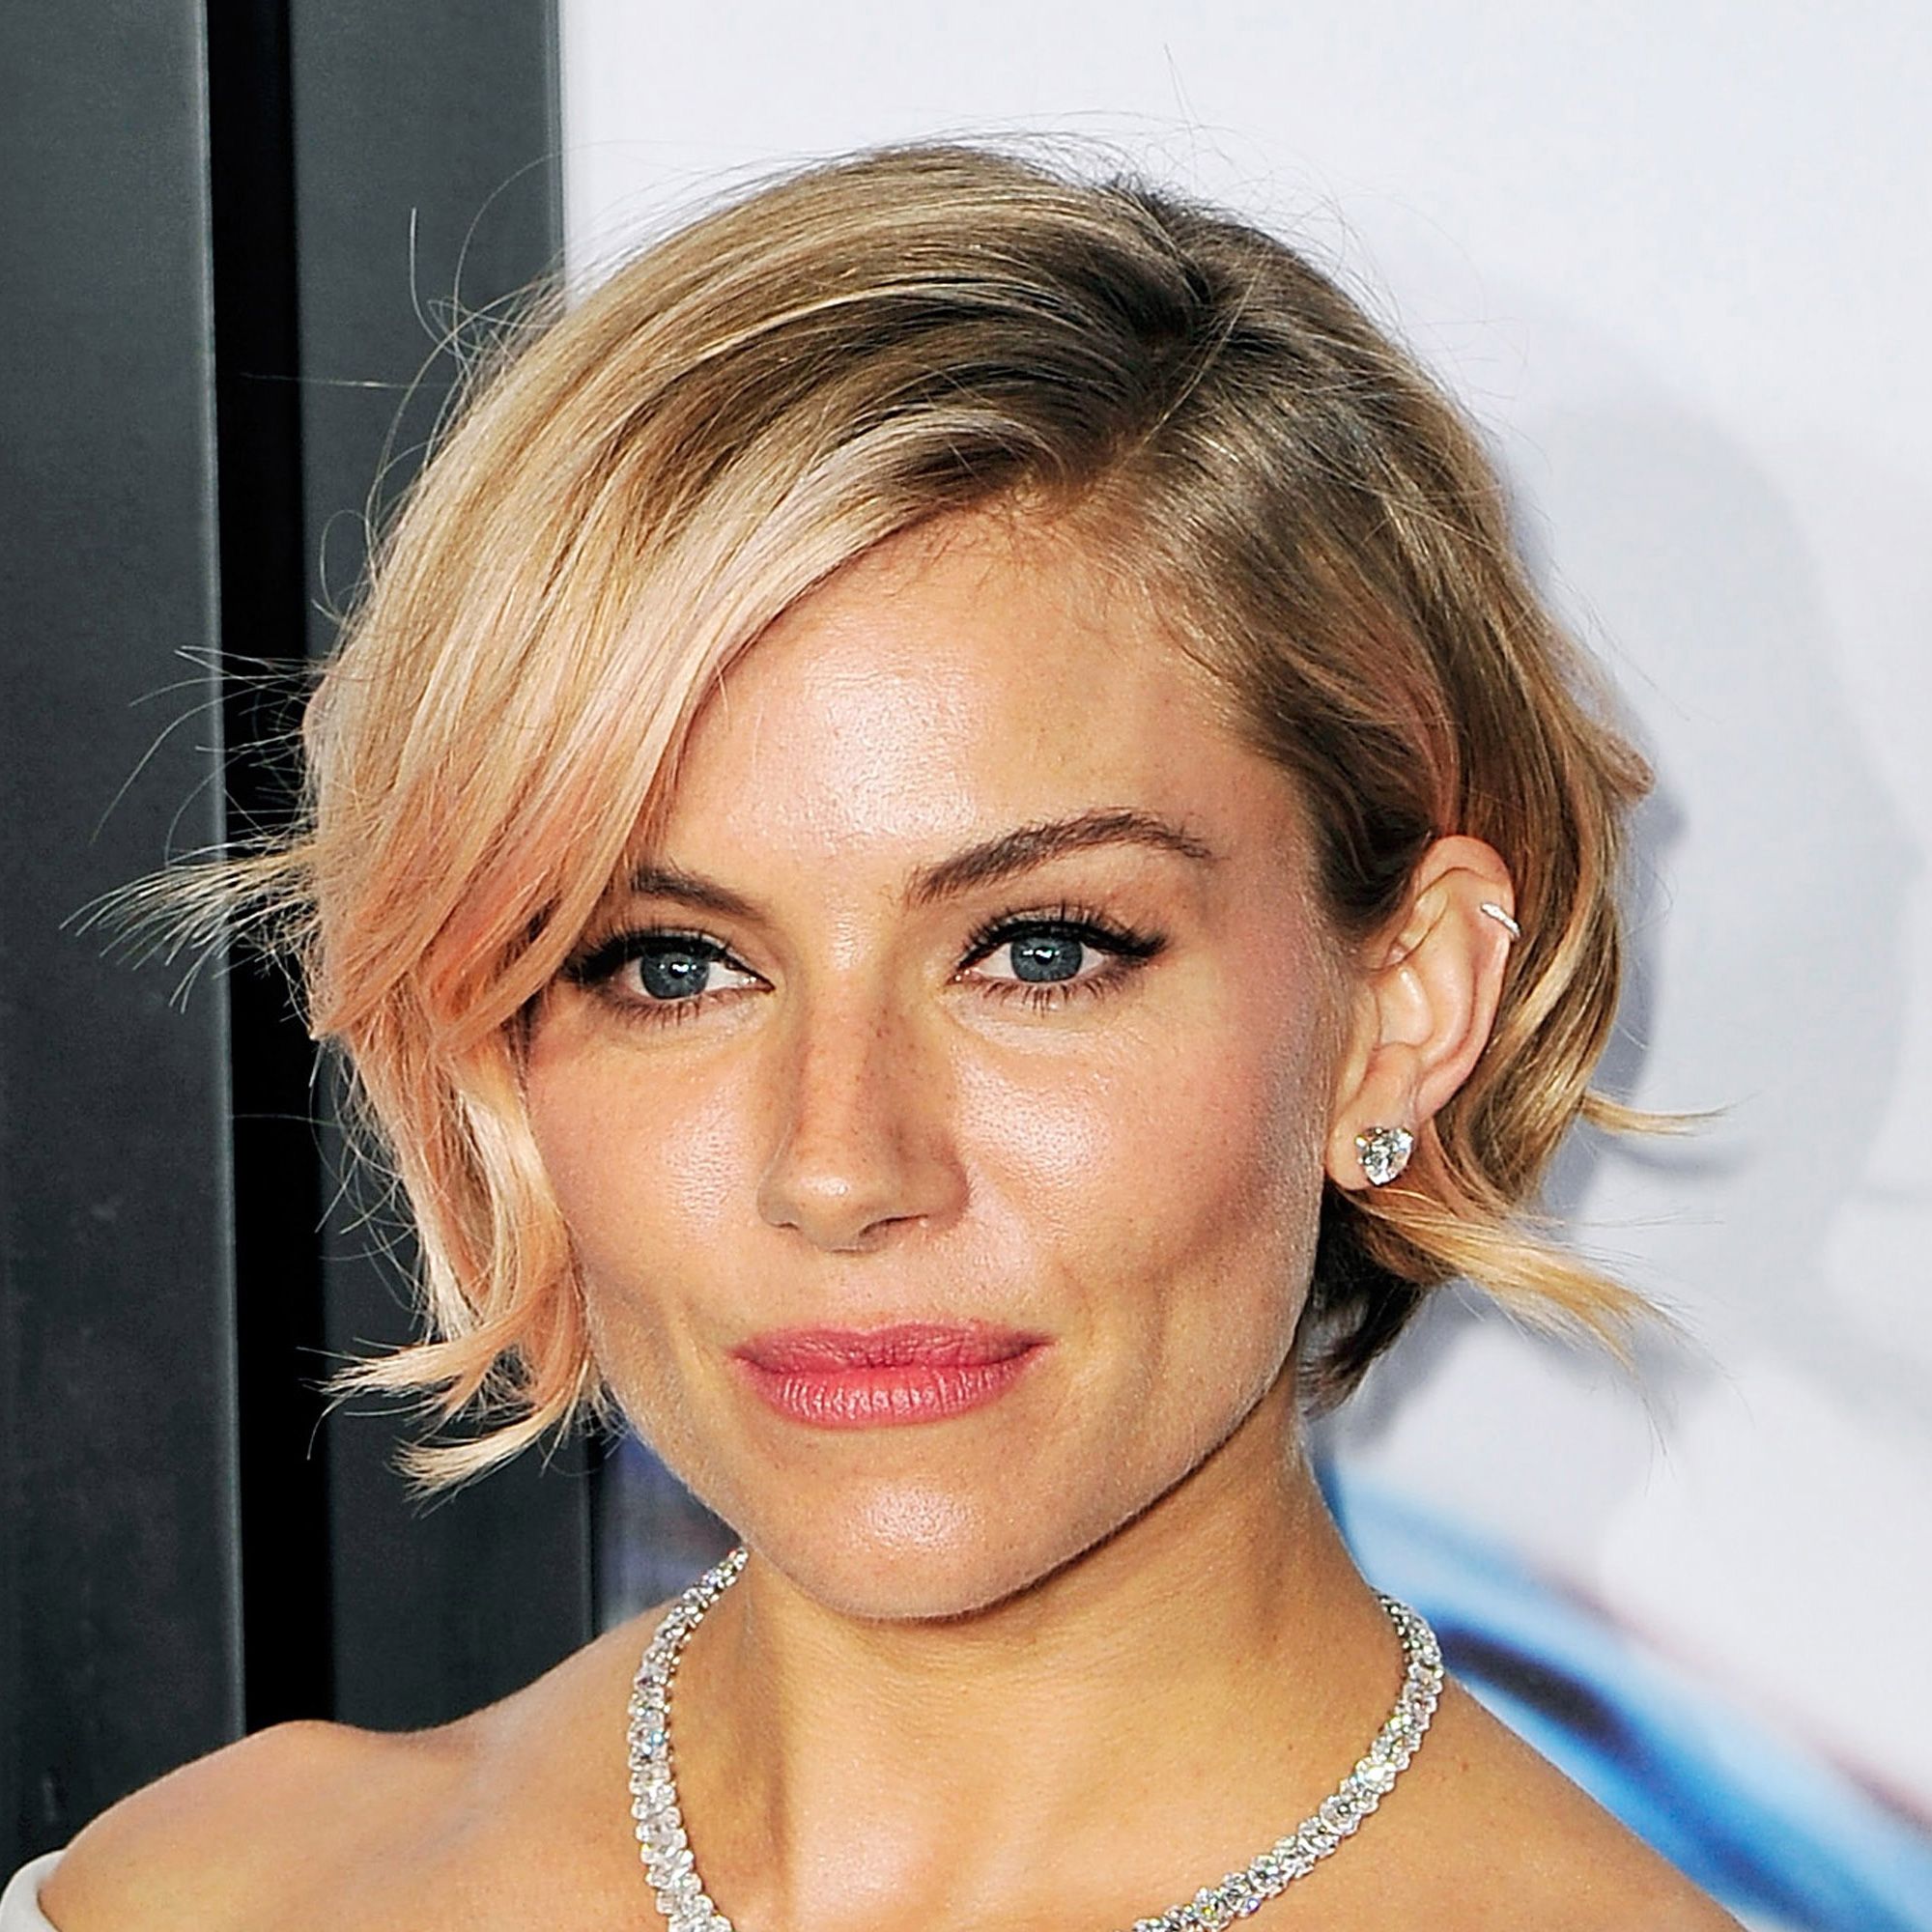 87 Cute Short Hairstyles & Haircuts - How To Style Short Hair